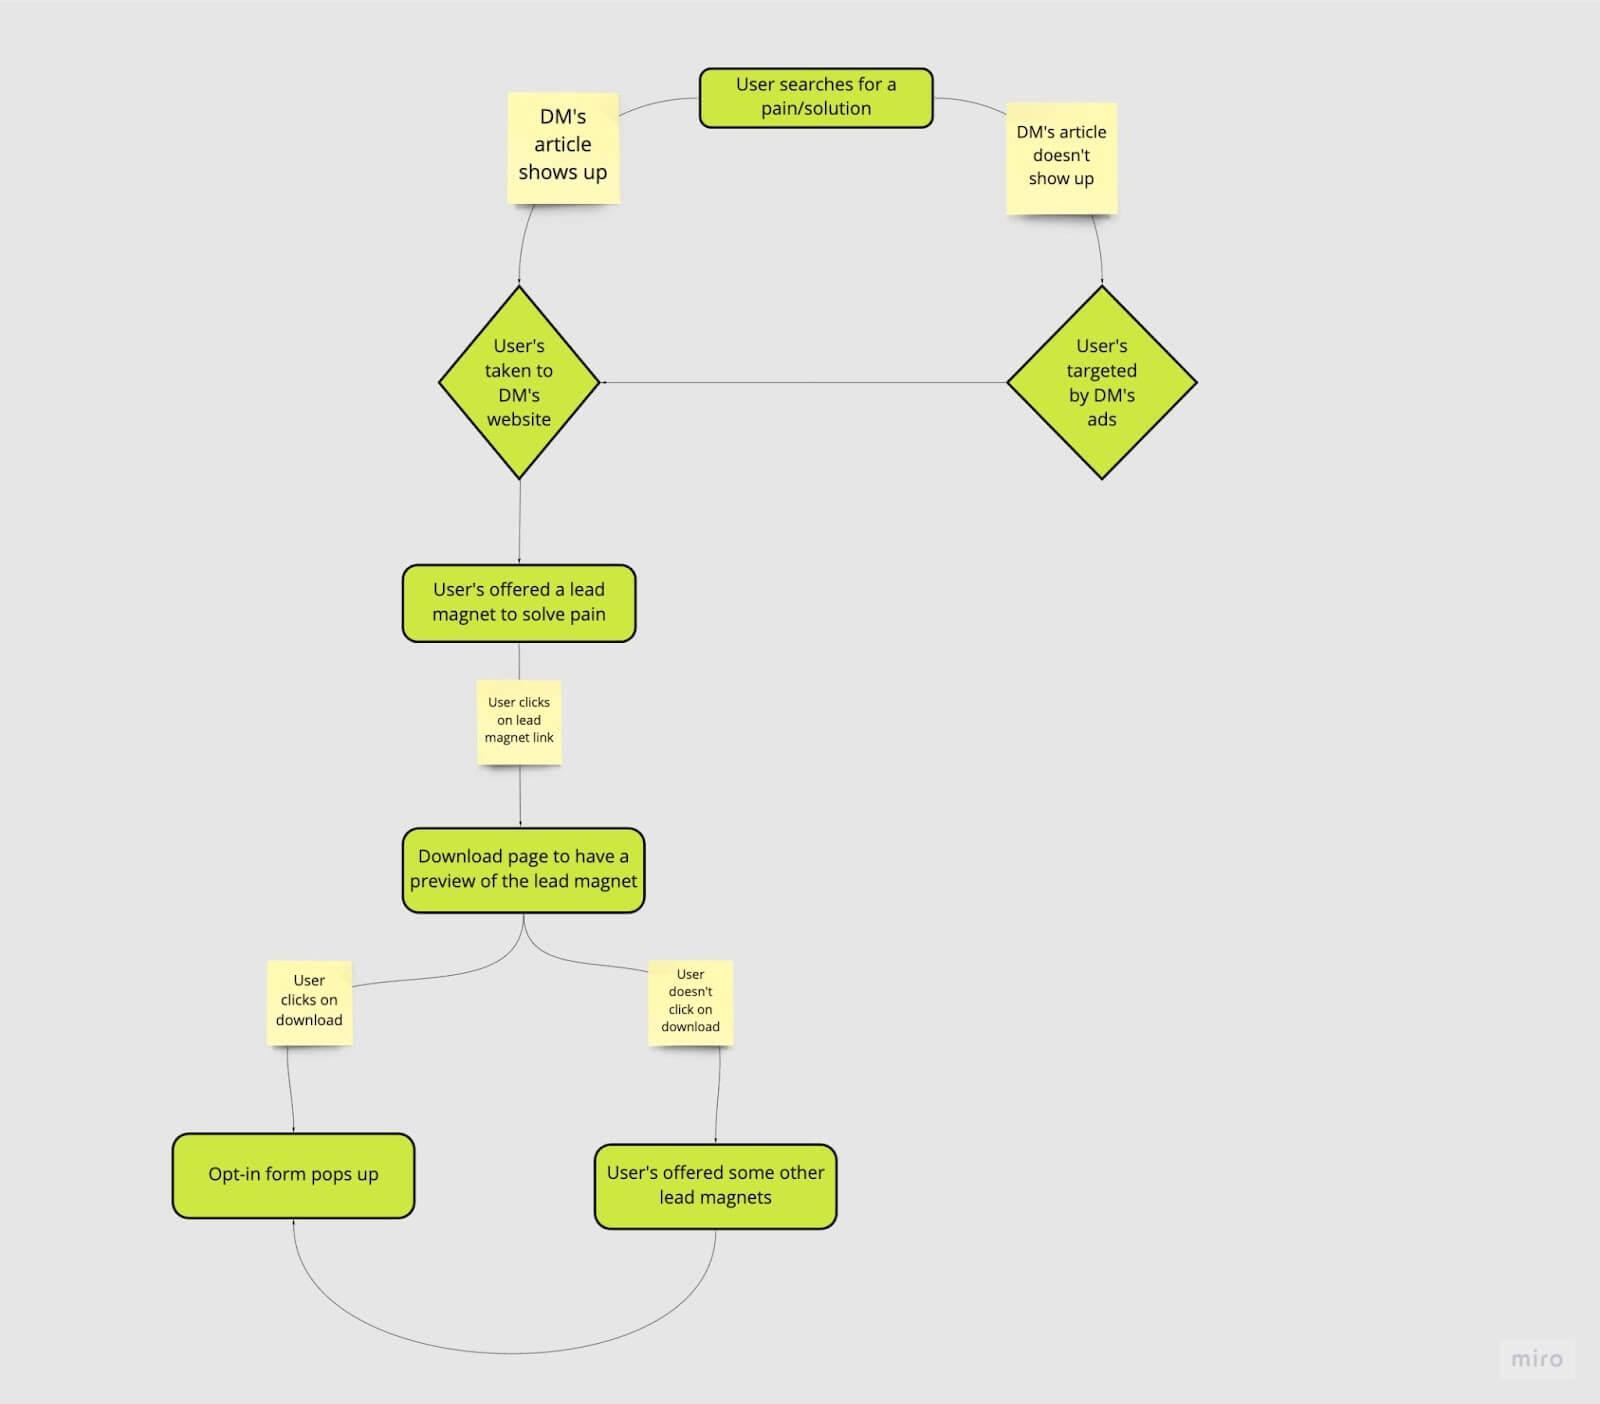 Example of the consumer flow chart for DM's emails